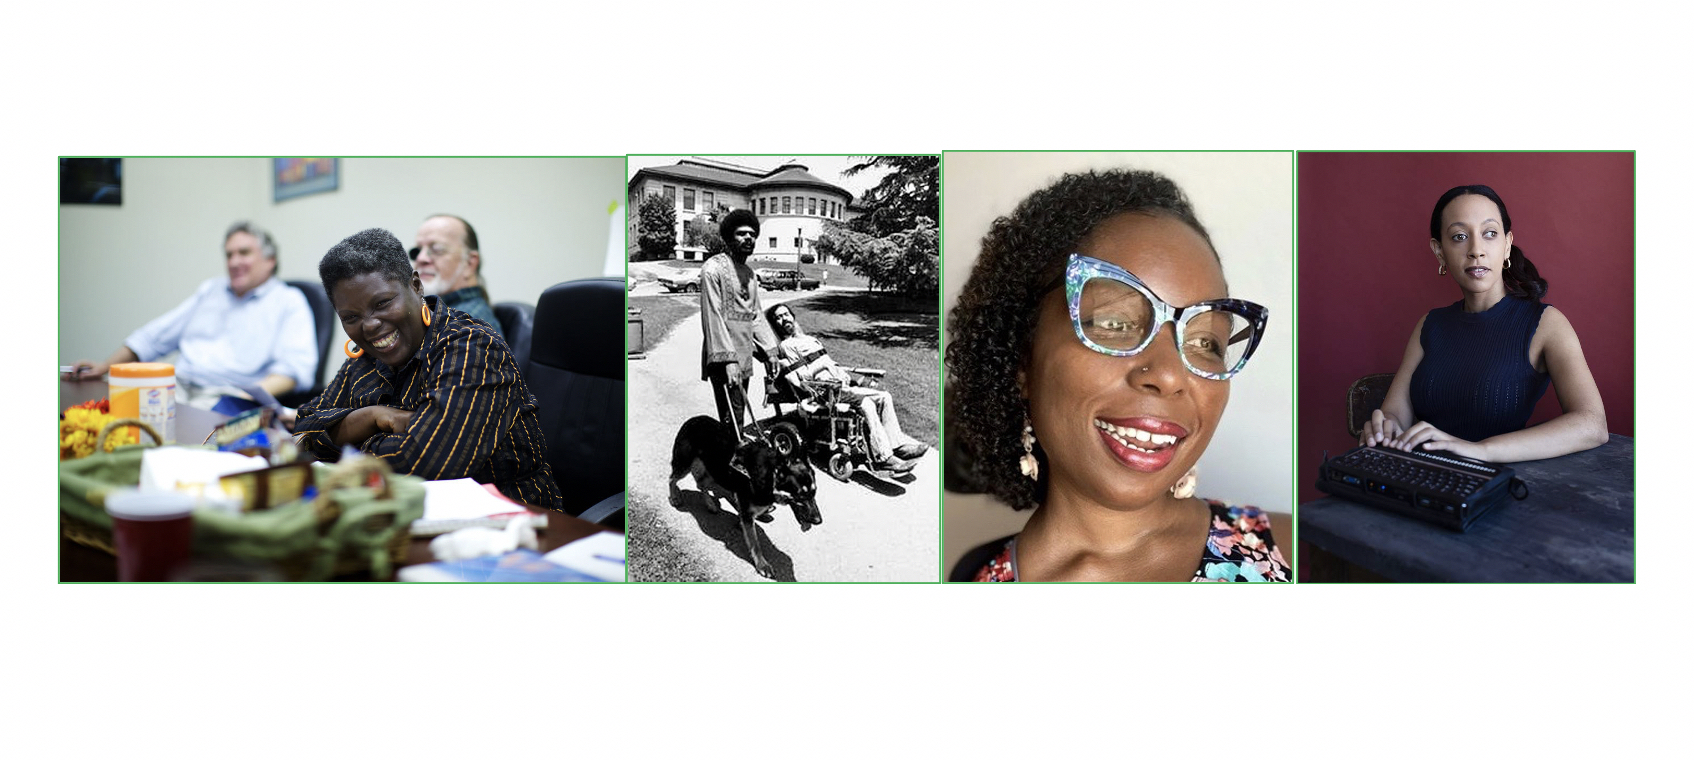 The image shows portraits of four Black disability rights activists